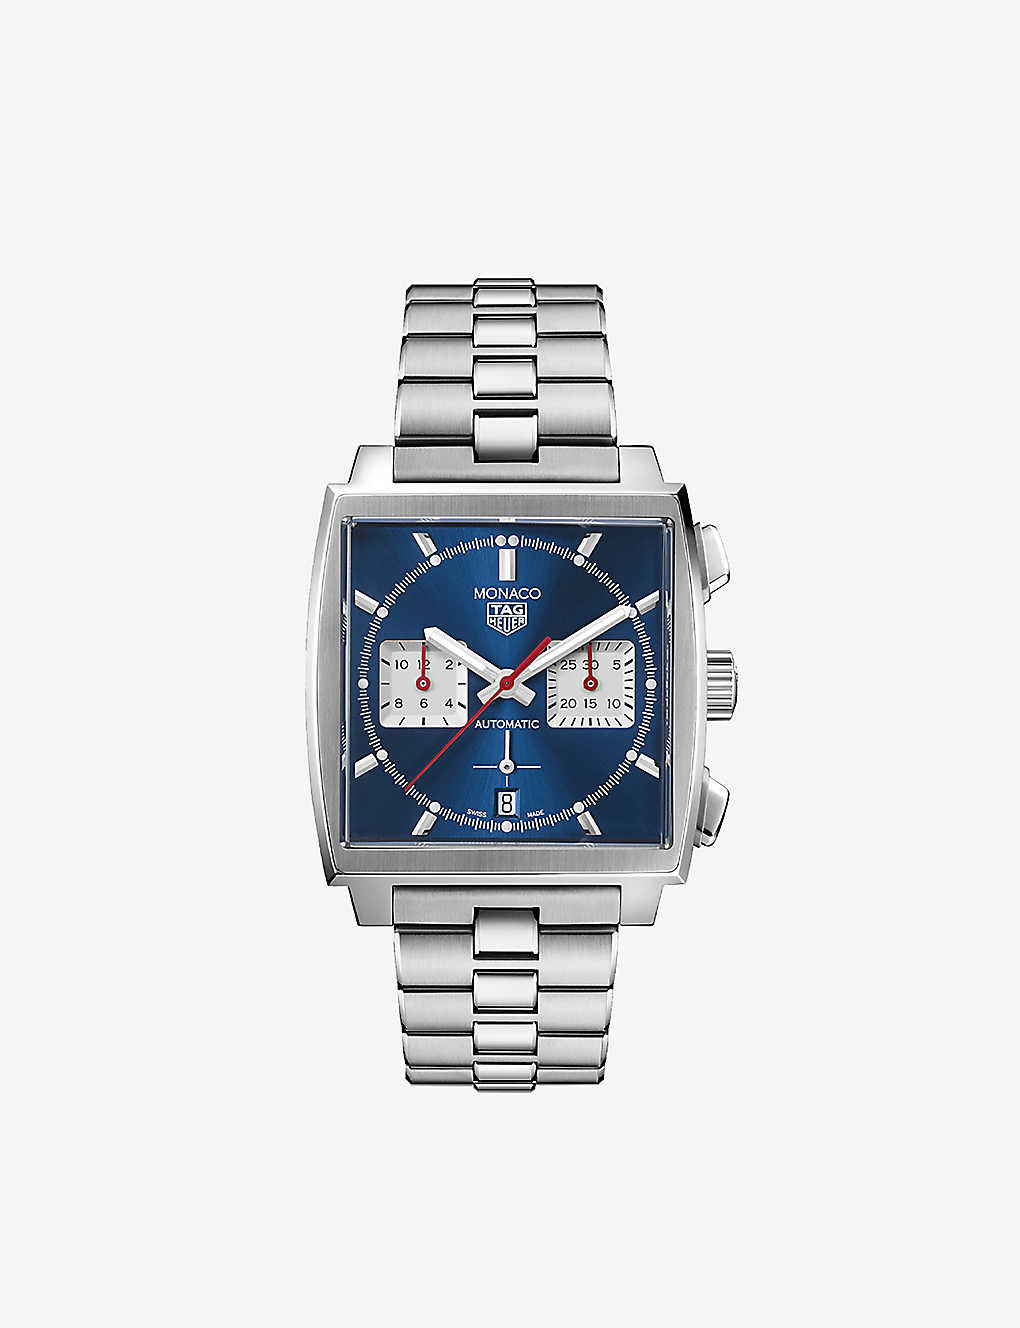 Tag Heuer Cbl2111.ba0644 Monaco Stainless-steel Automatic Watch In Blue